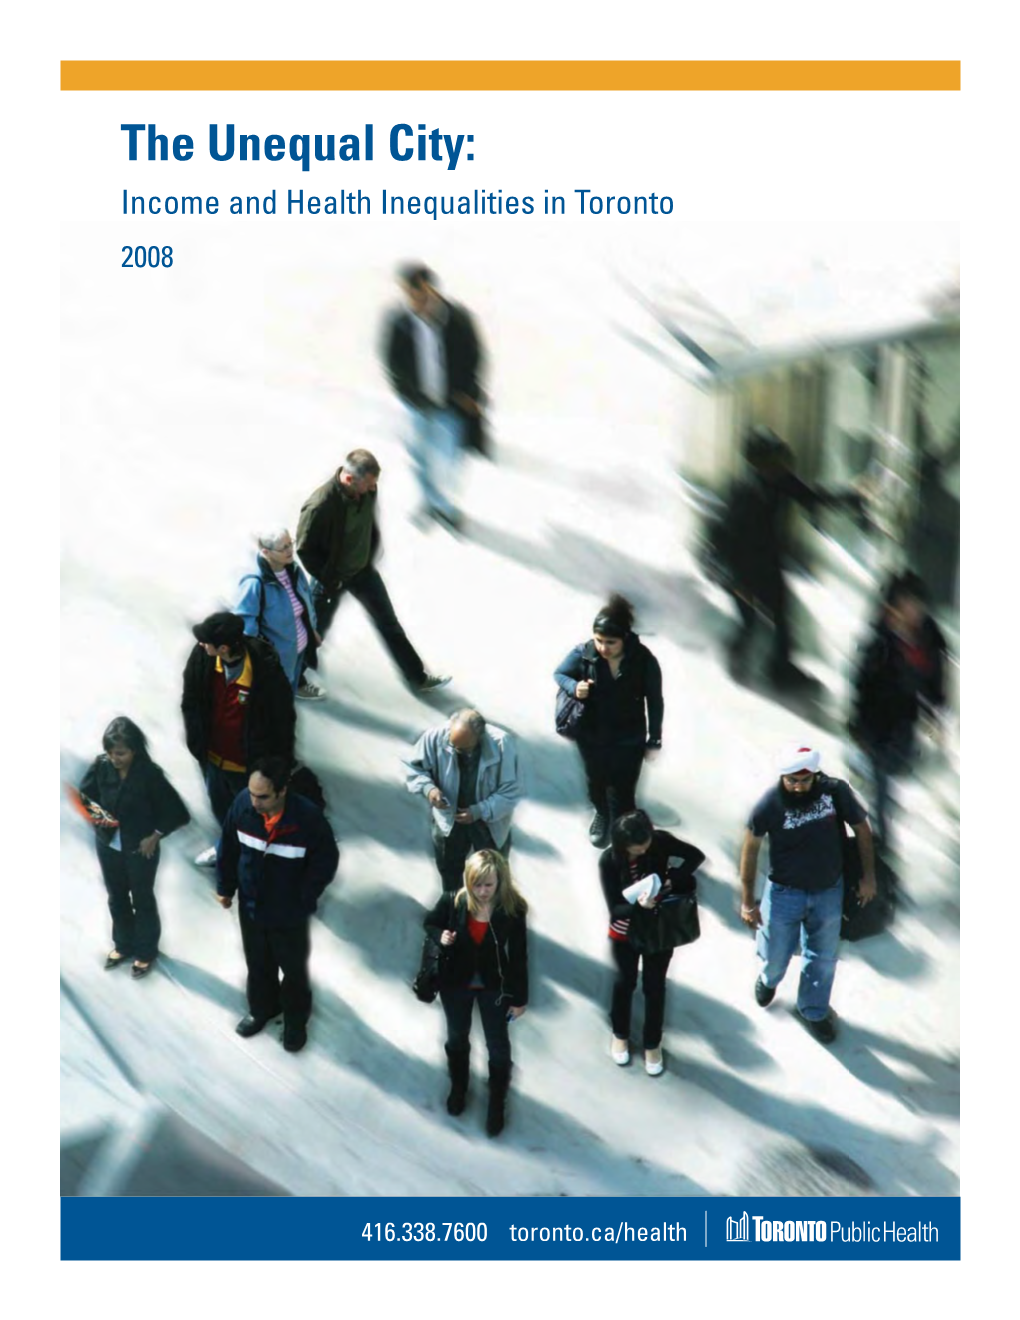 The Unequal City: Income and Health Inequalities in Toronto 2008